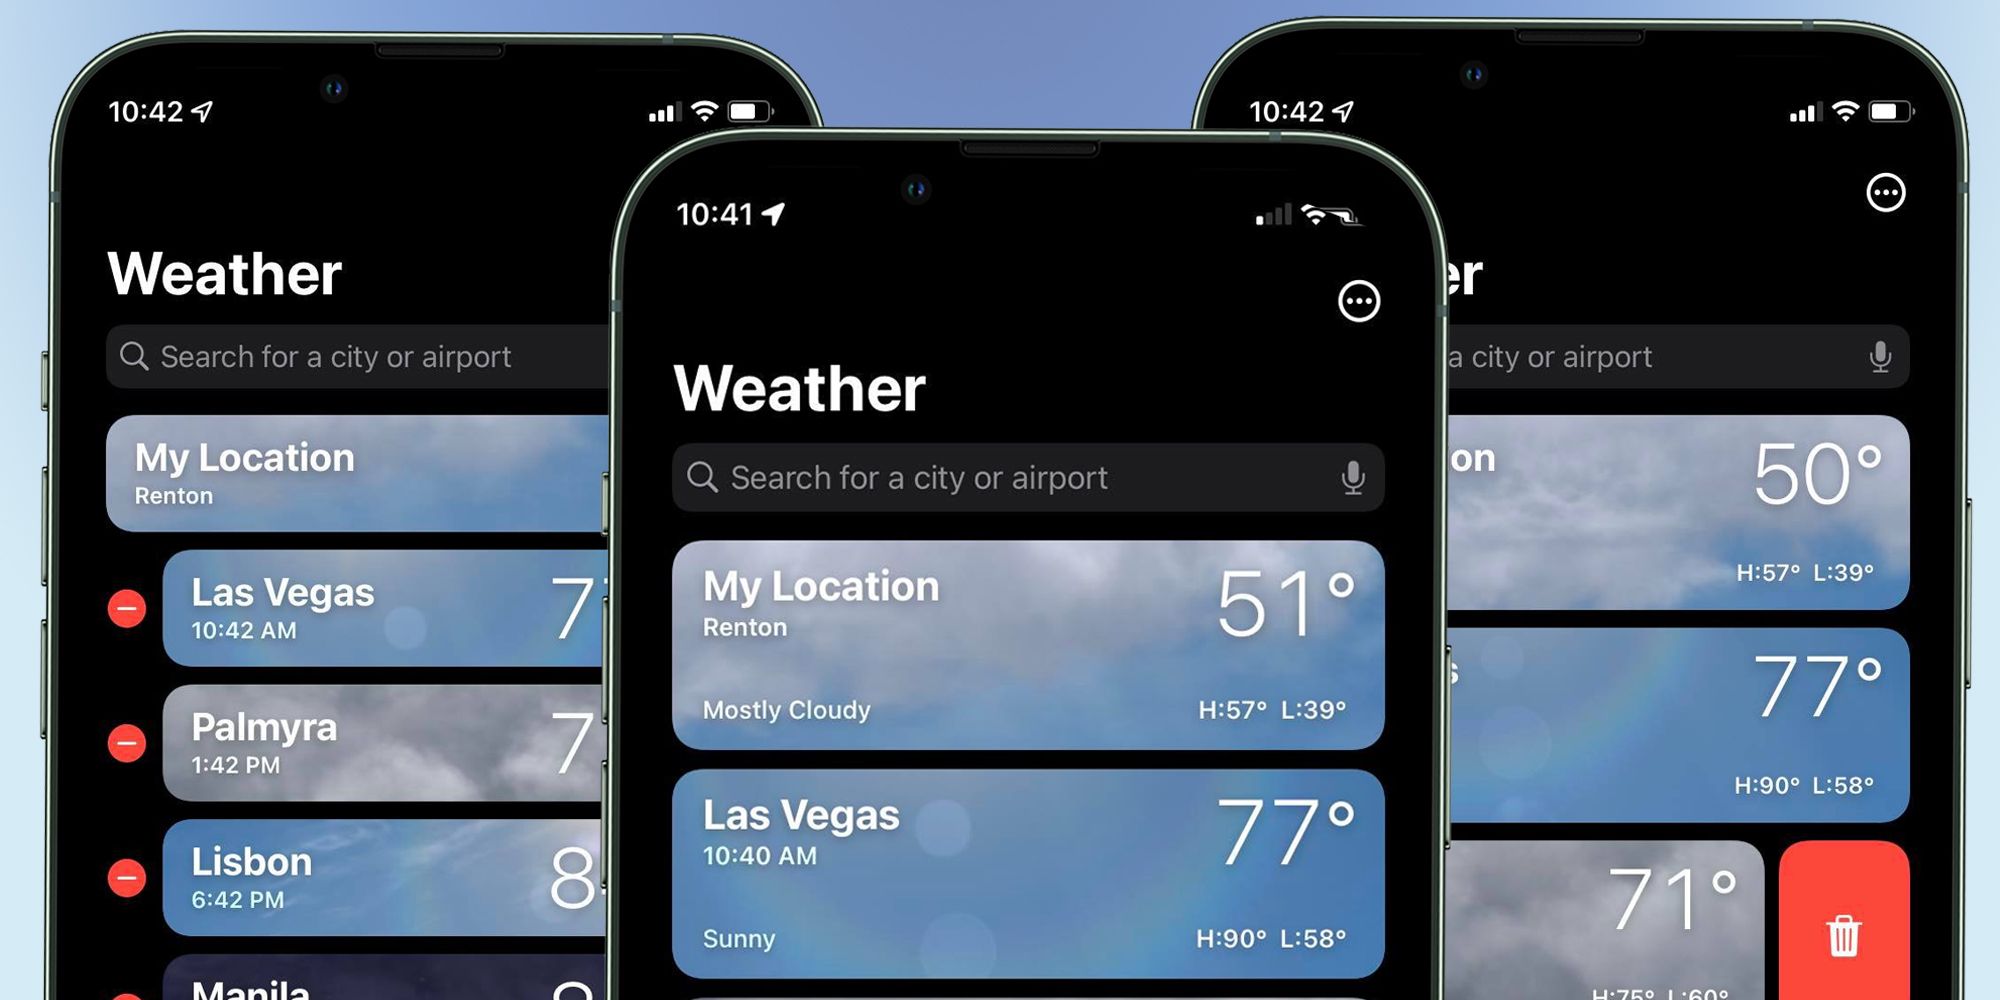 How To Add Locations To The iPhone Weather App